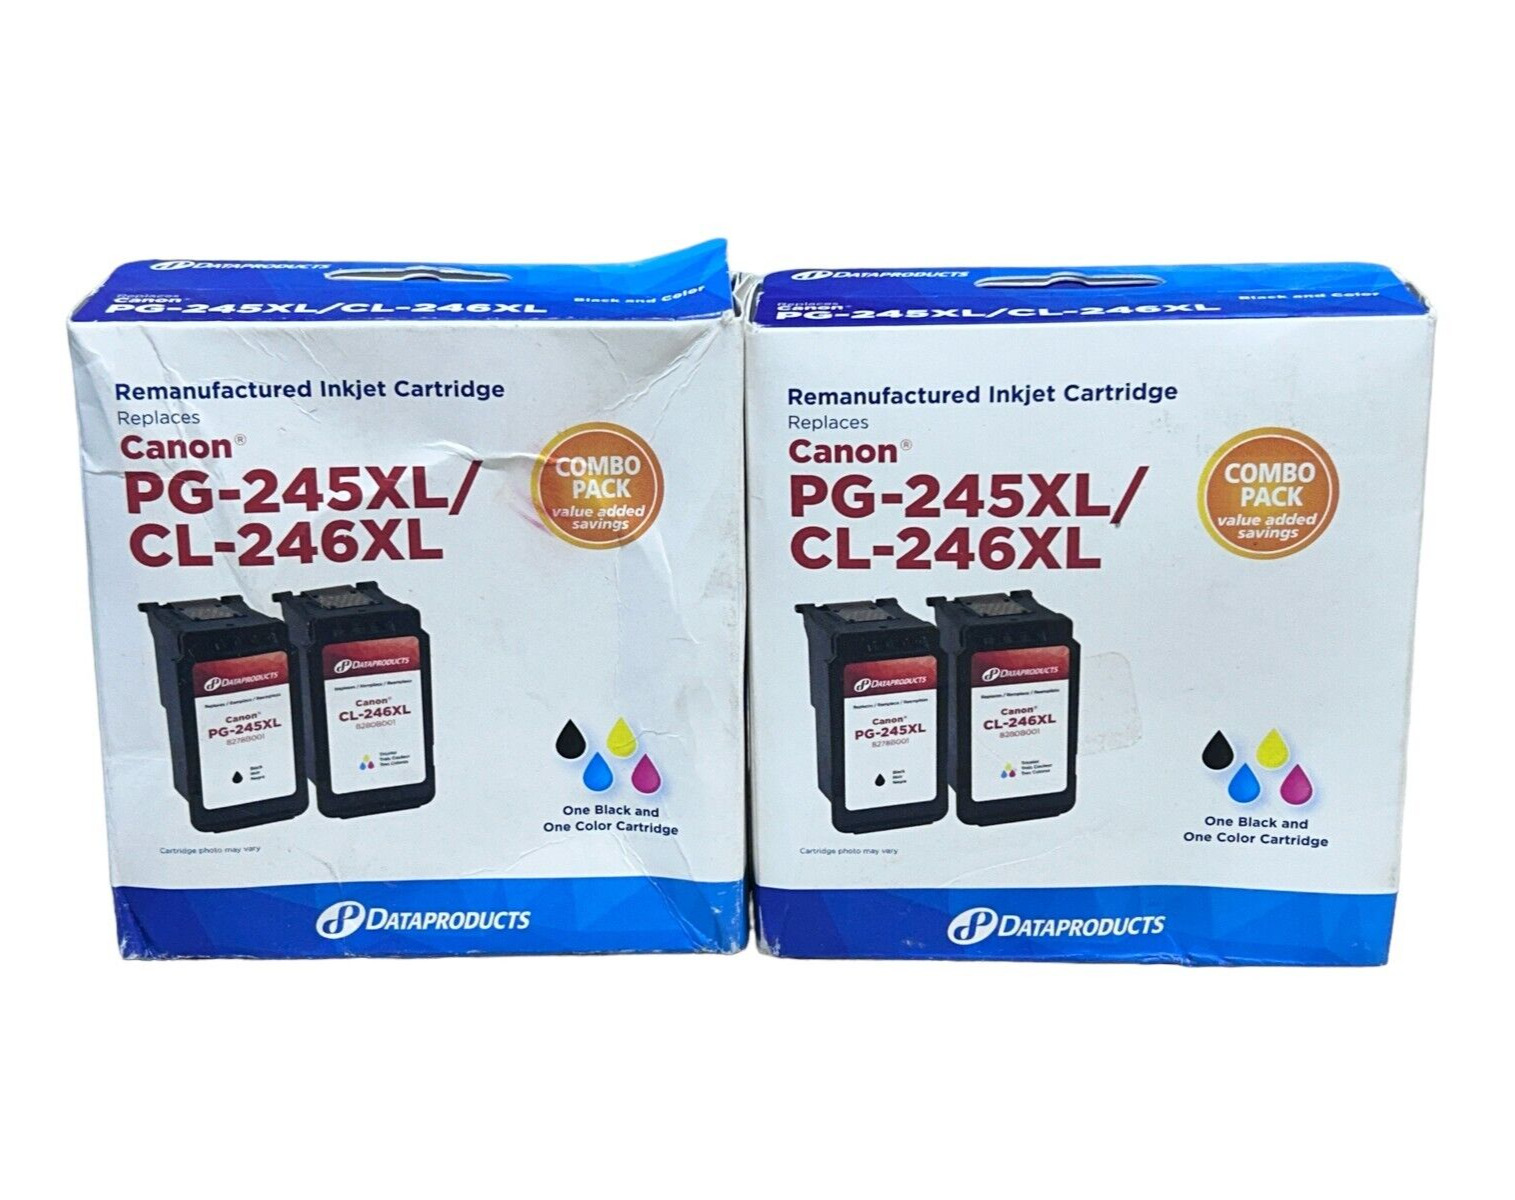 (2) Dataproducts Inkjet Cartridge Combo Black/Color for Canon PG-245XL/CL-246XL